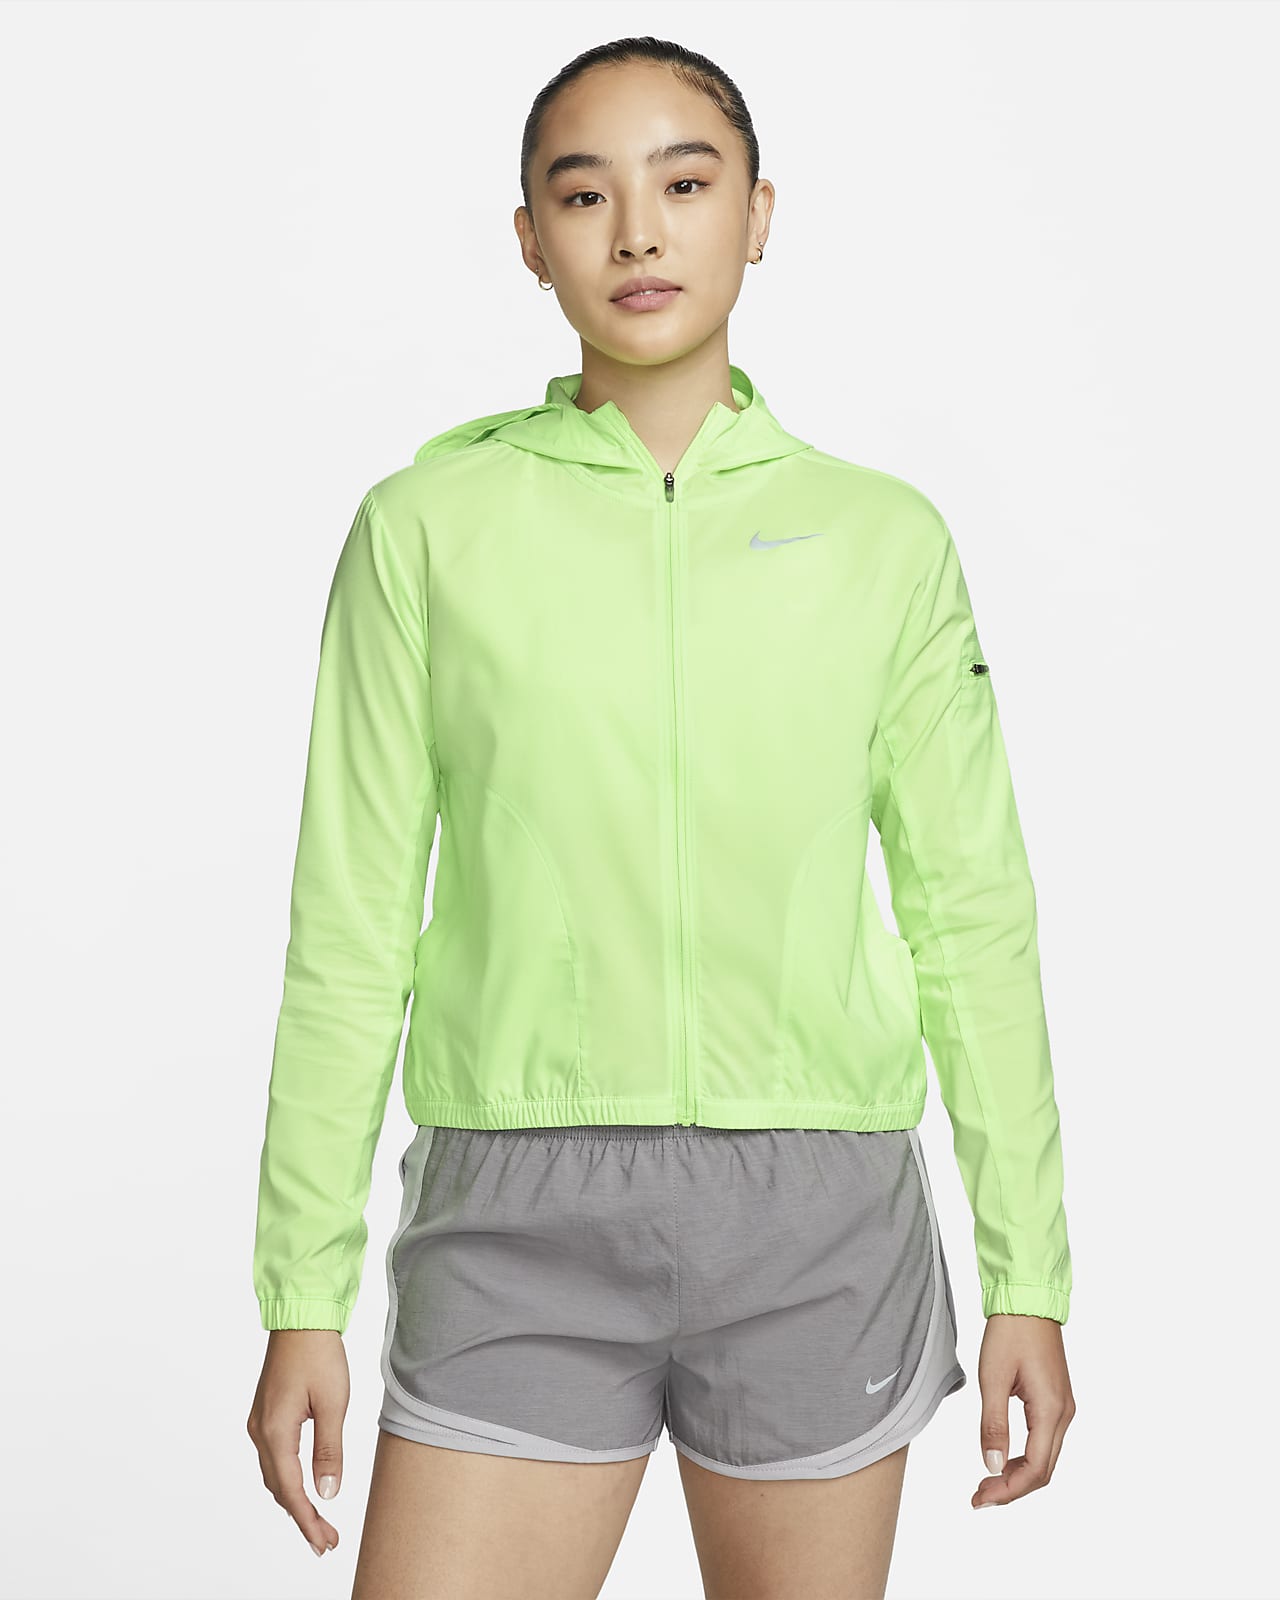 Nike Impossibly Light Women's Hooded Running Jacket